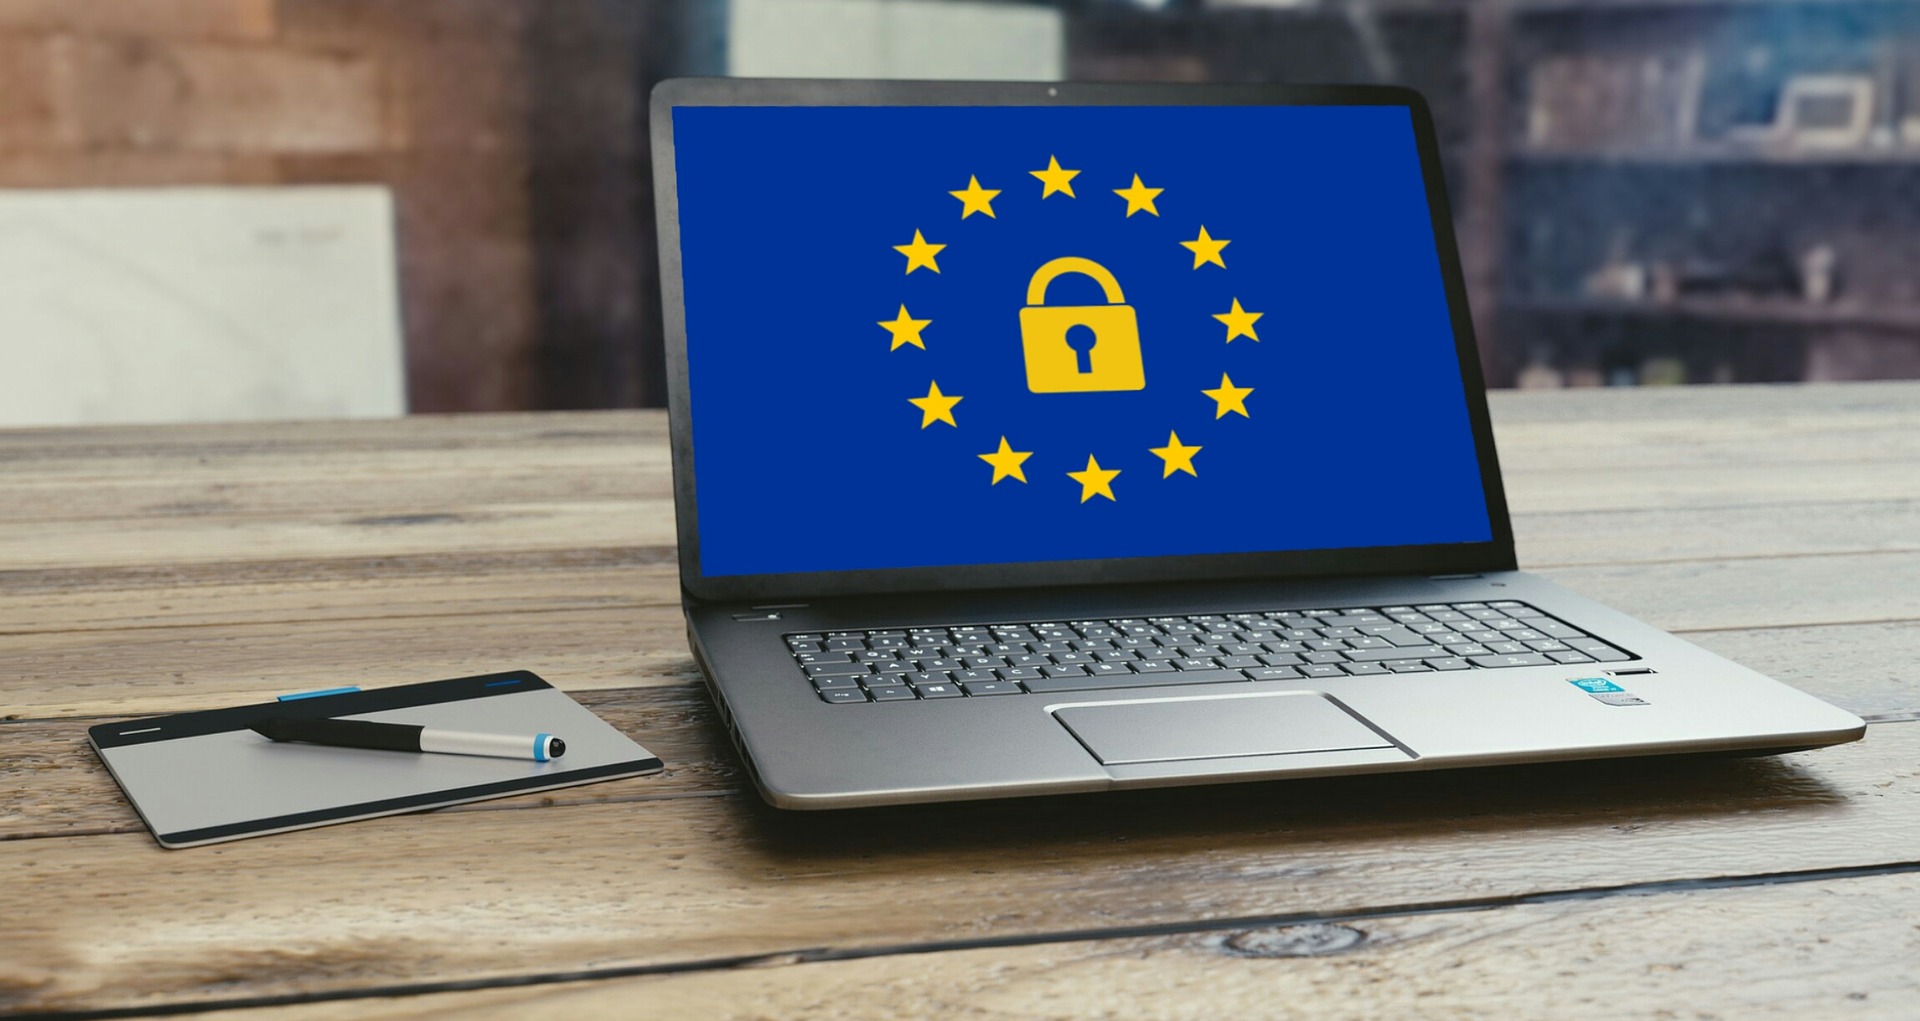 GDPR Requirements and how to be GDPR Compliant